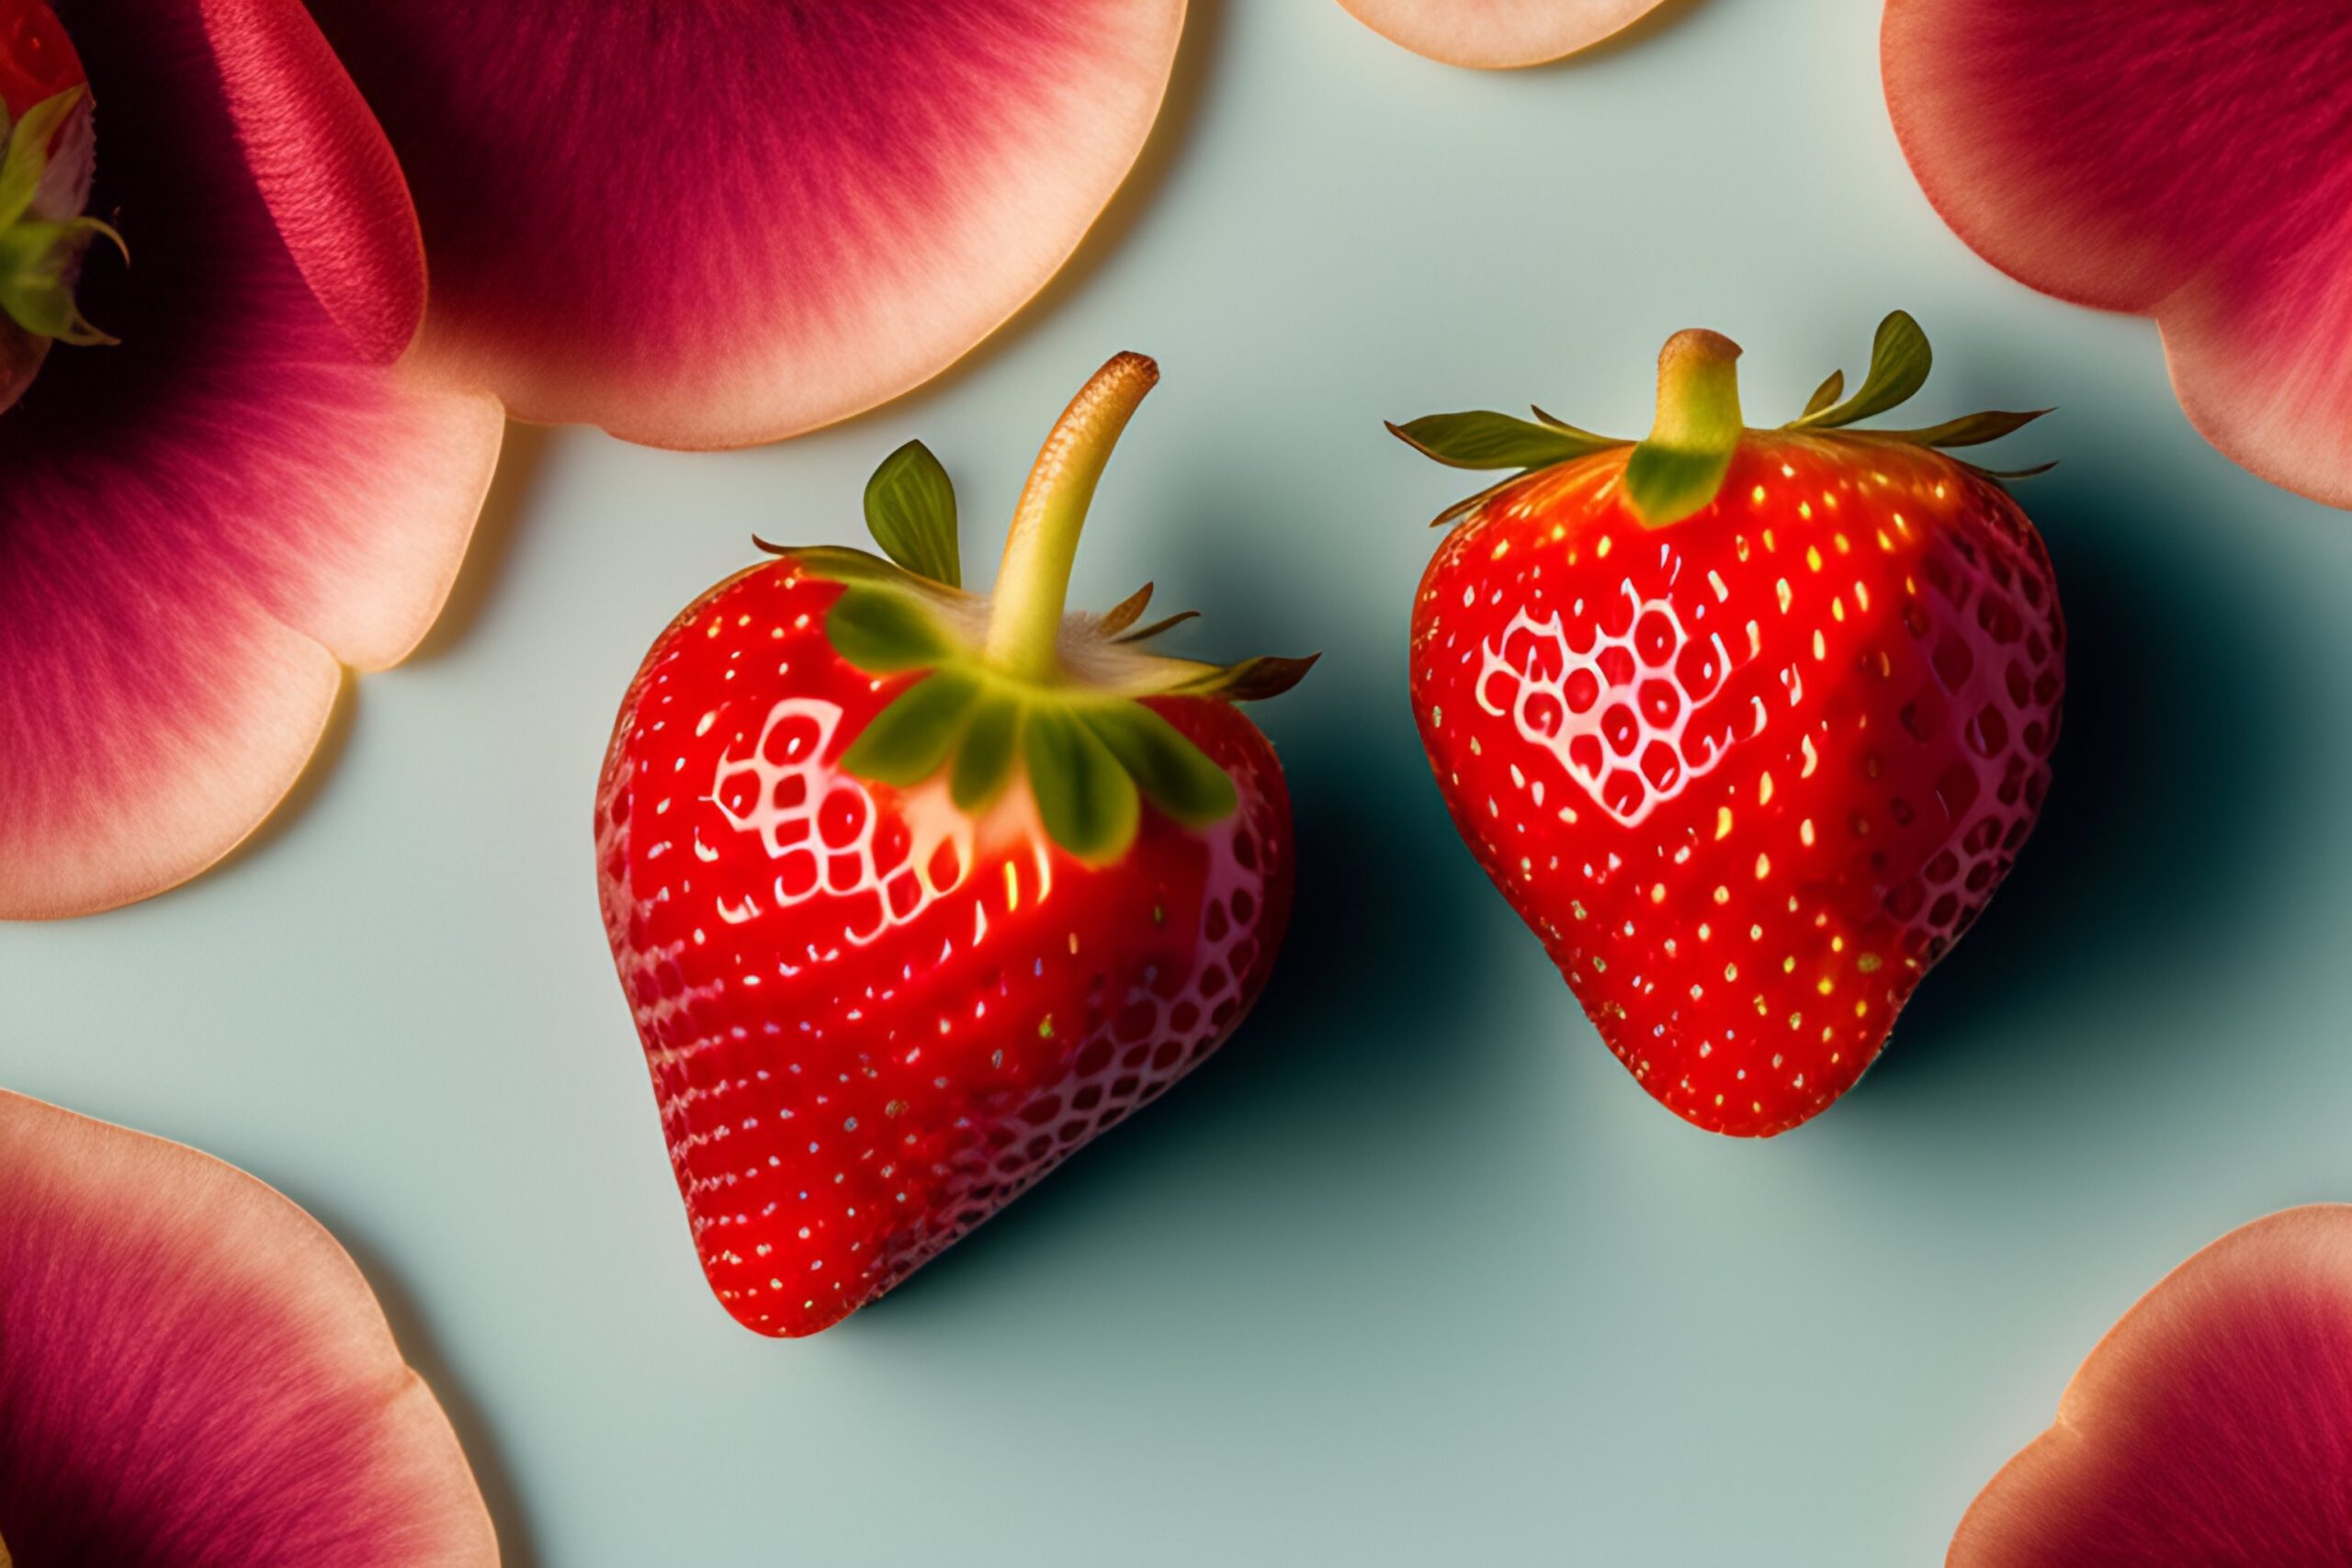 how to grow hydroponic strawberries